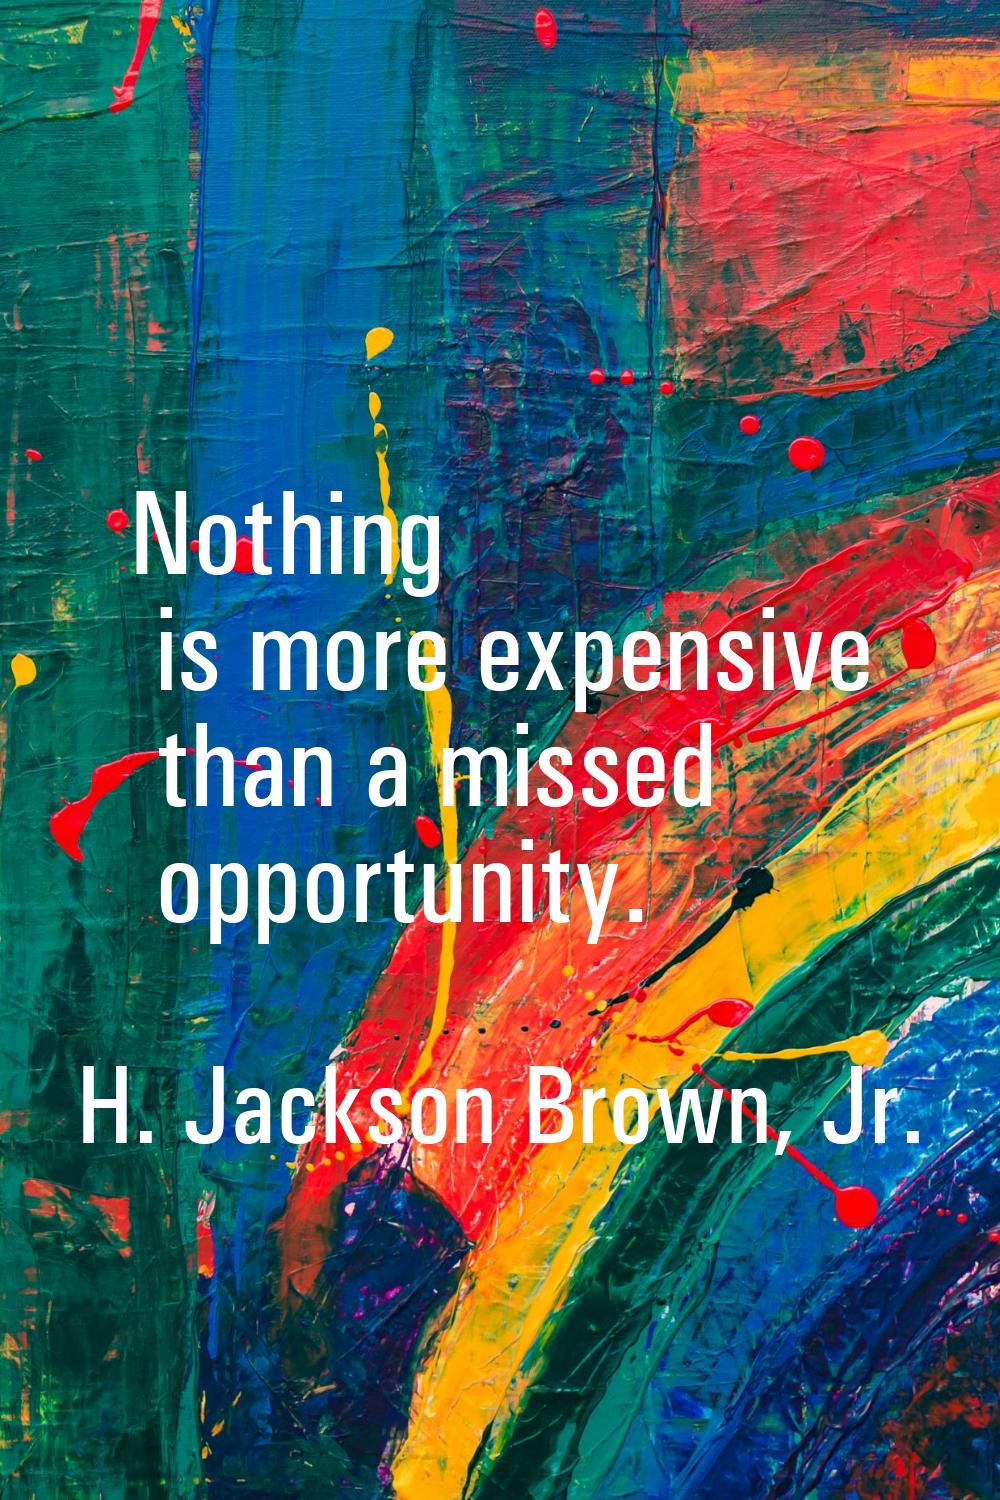 Nothing is more expensive than a missed opportunity.